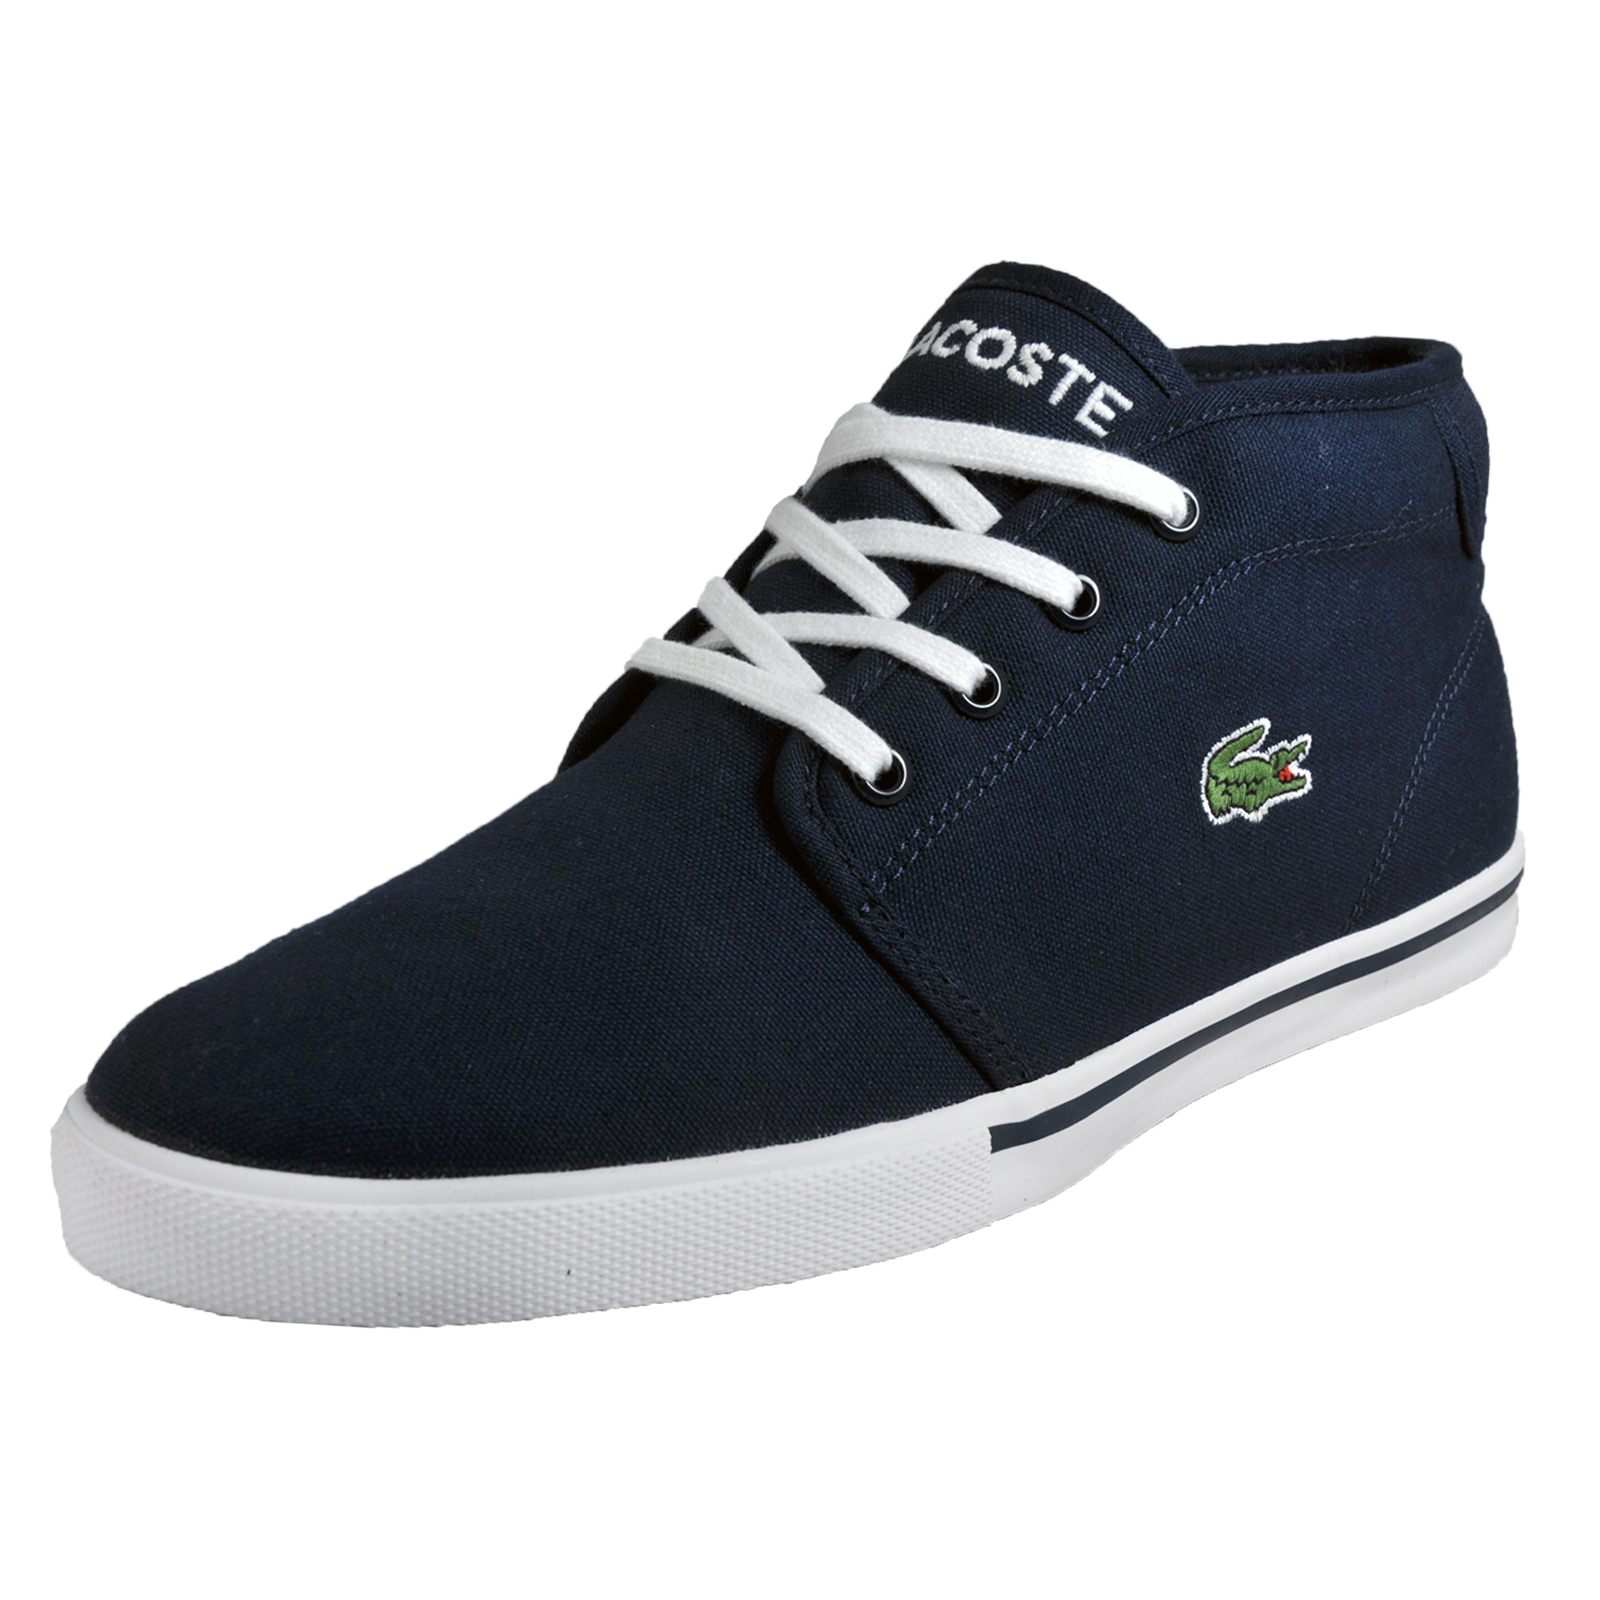 Lacoste Ampthill LCR2 Mens Mid Cut Designer Classic Casual Trainers ...